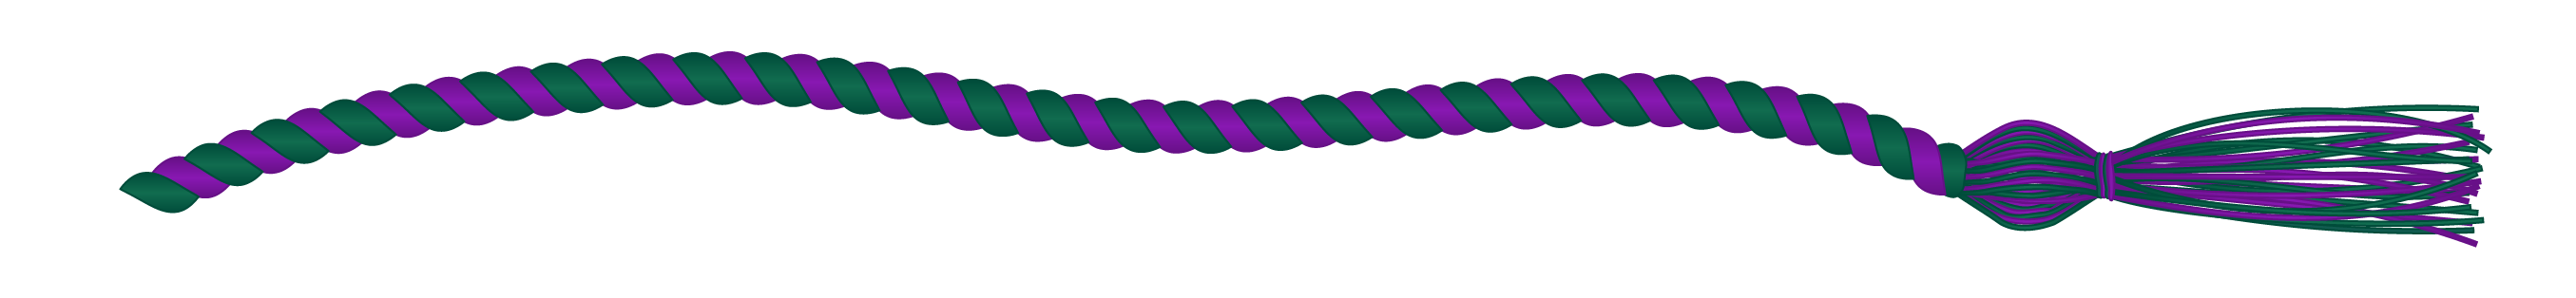 Purple and green cord